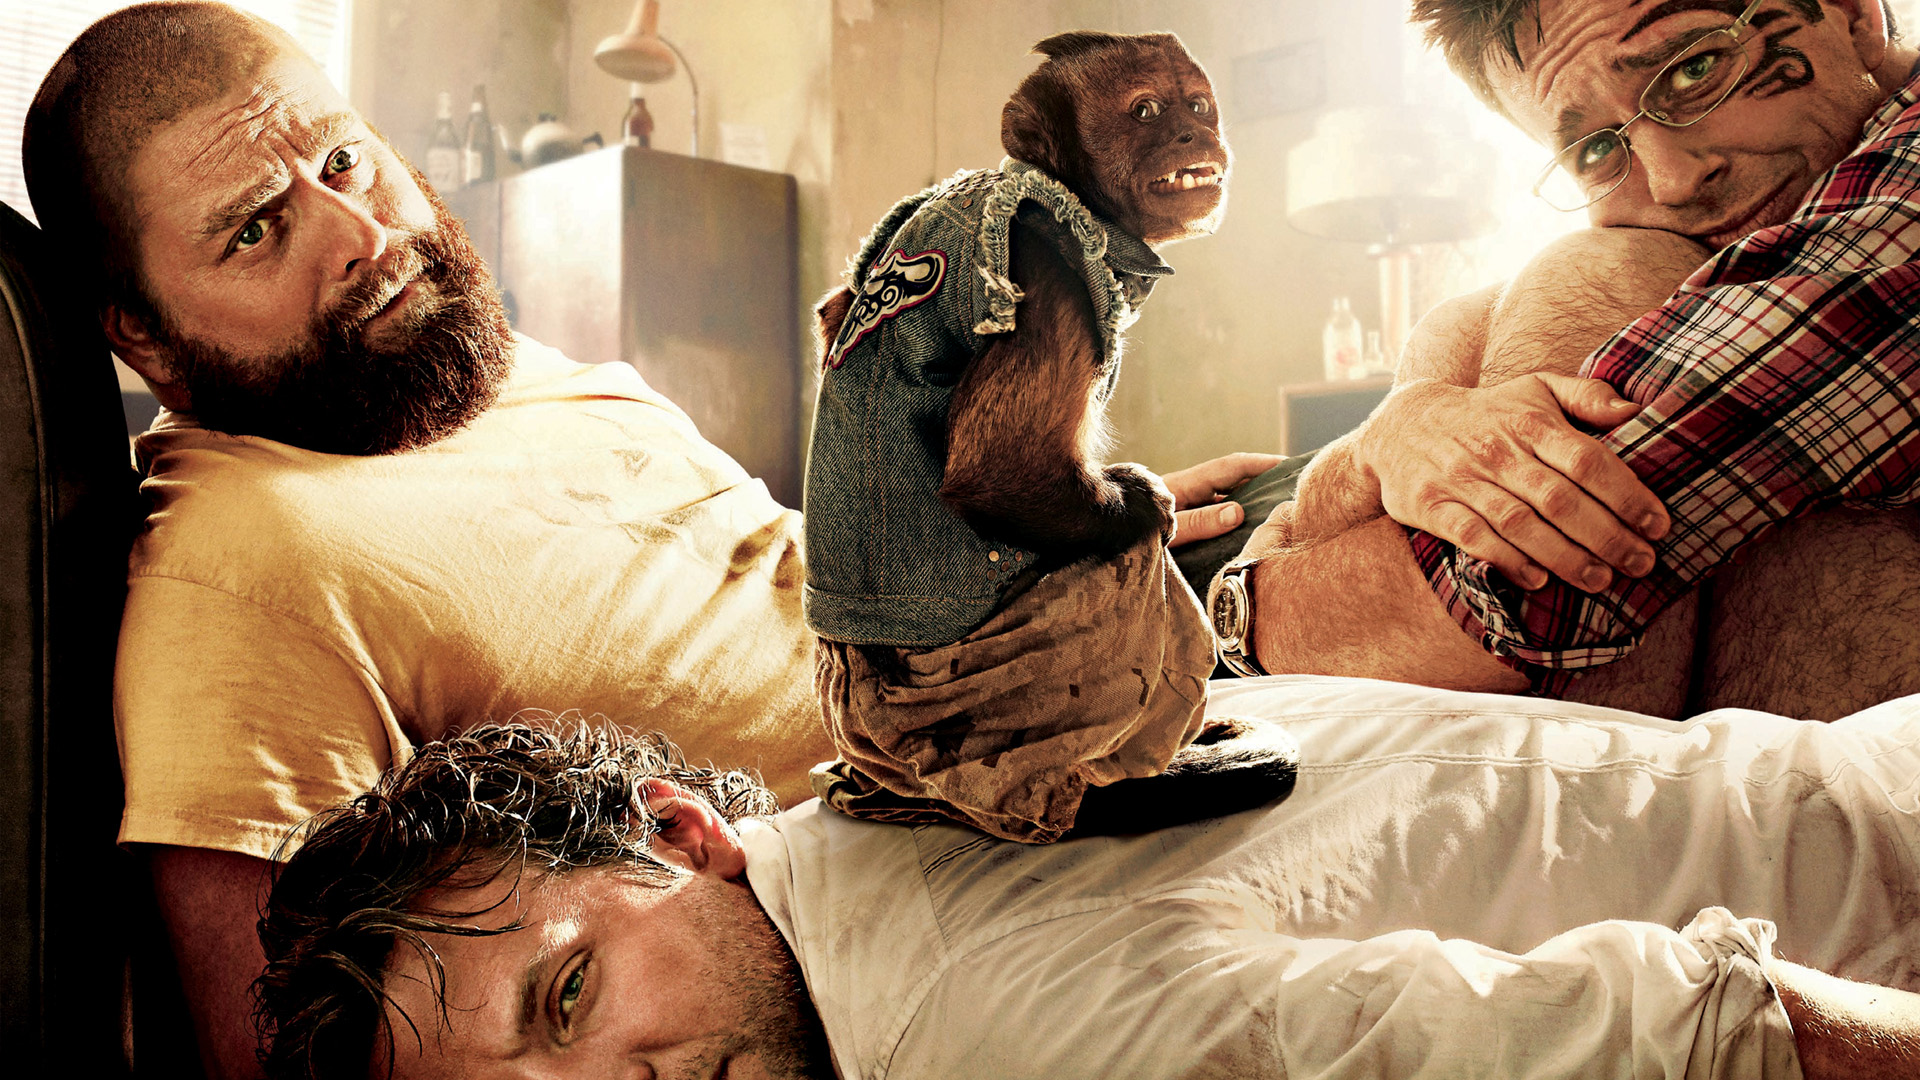 Movie The Hangover Part II HD Wallpaper Background Image.